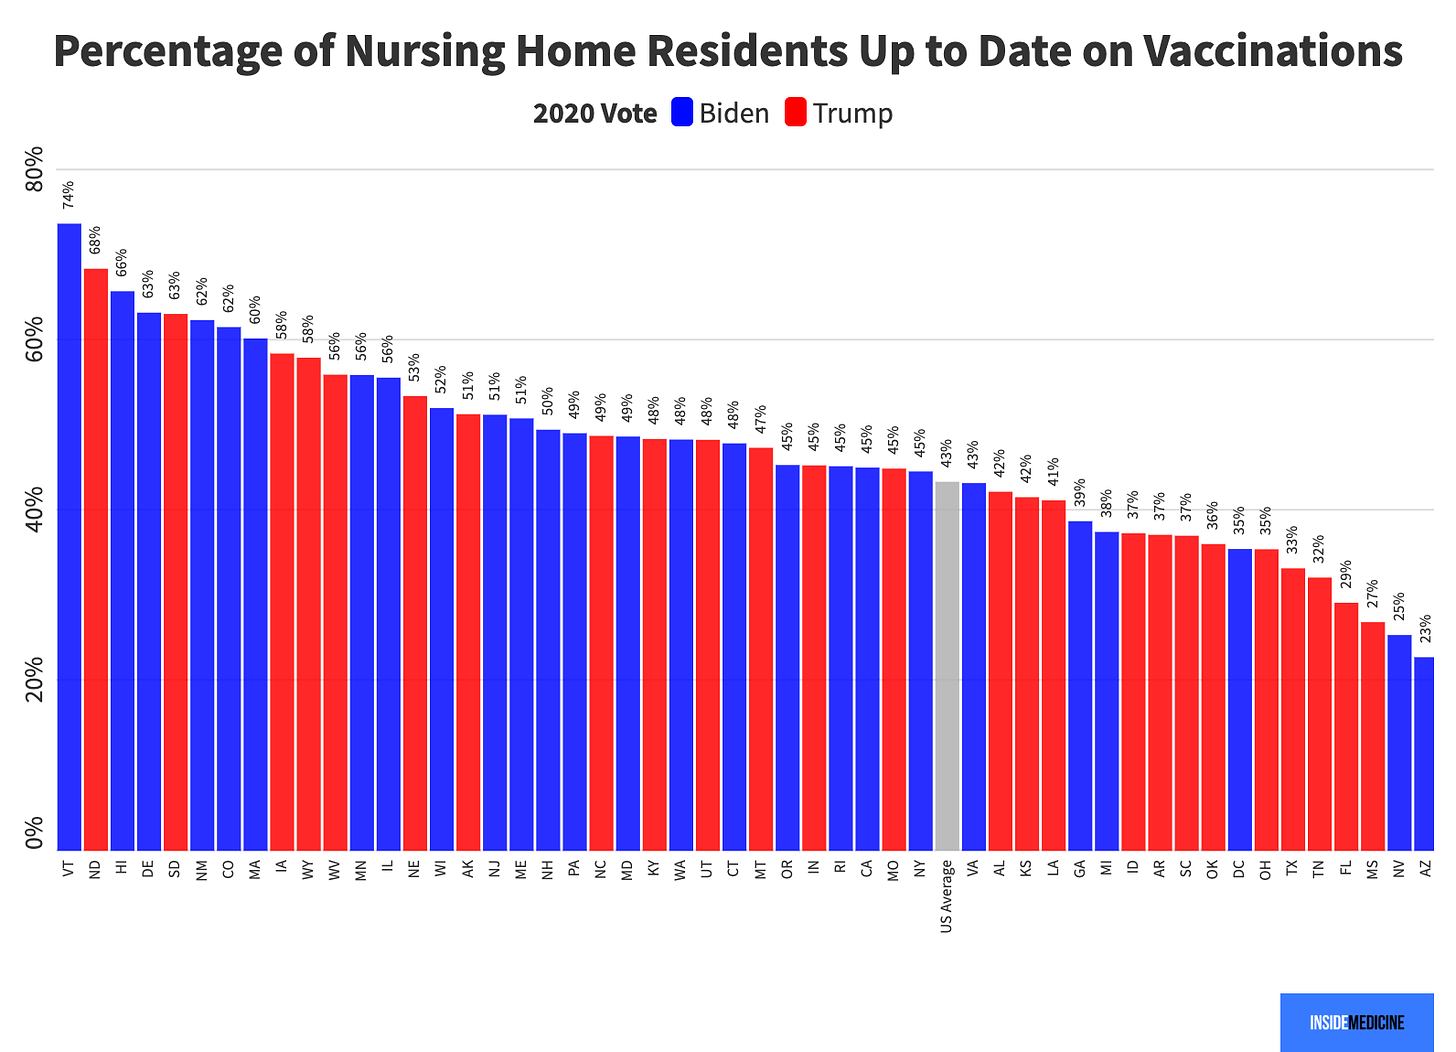 Percentage of nursing home residents up to date on vaccines by Biden and Trump vote